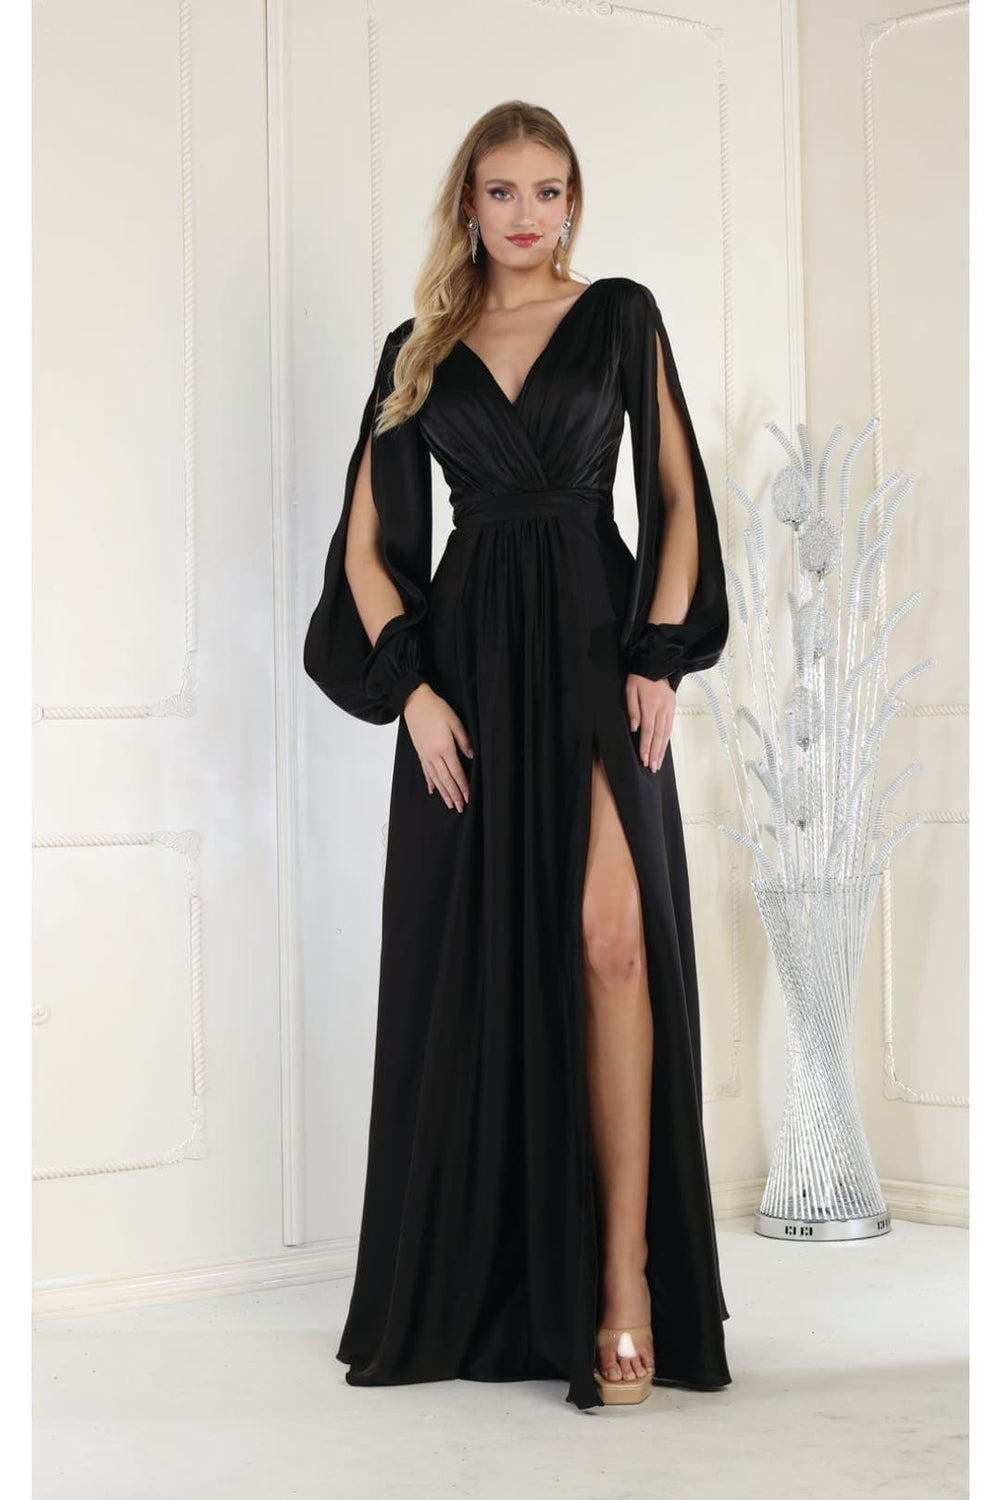 May Queen Long Sleeve Simple Evening Gown MQ1857 | Formal Dress Shops ...